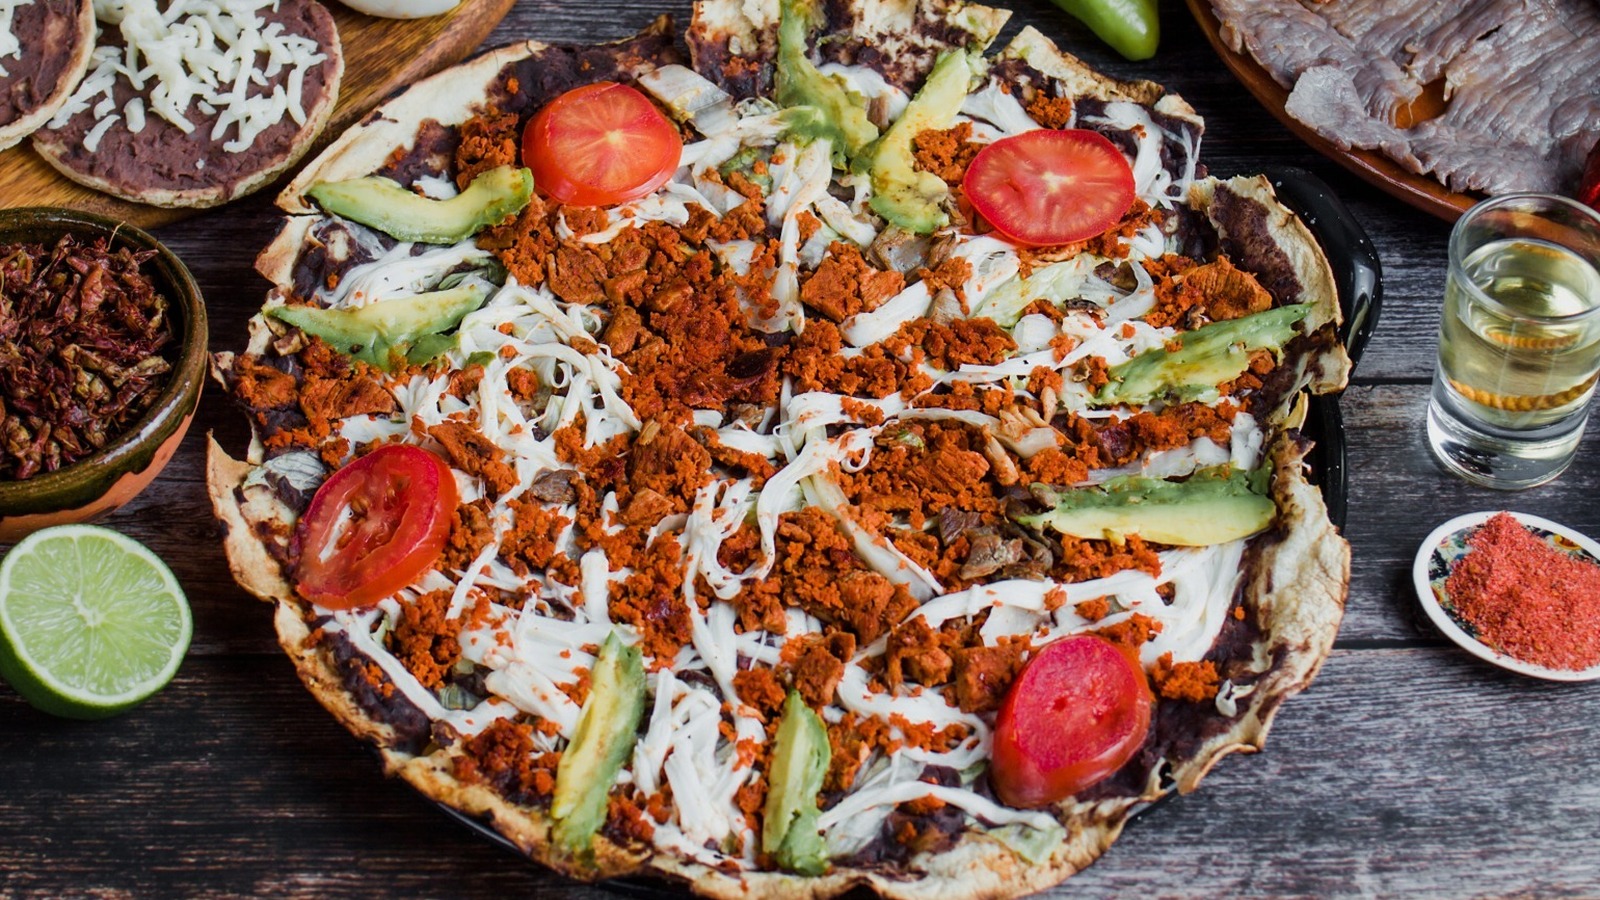 Sorry Taco Bell, Tlayuda Is The Original Mexican-Style Pizza - Mashed